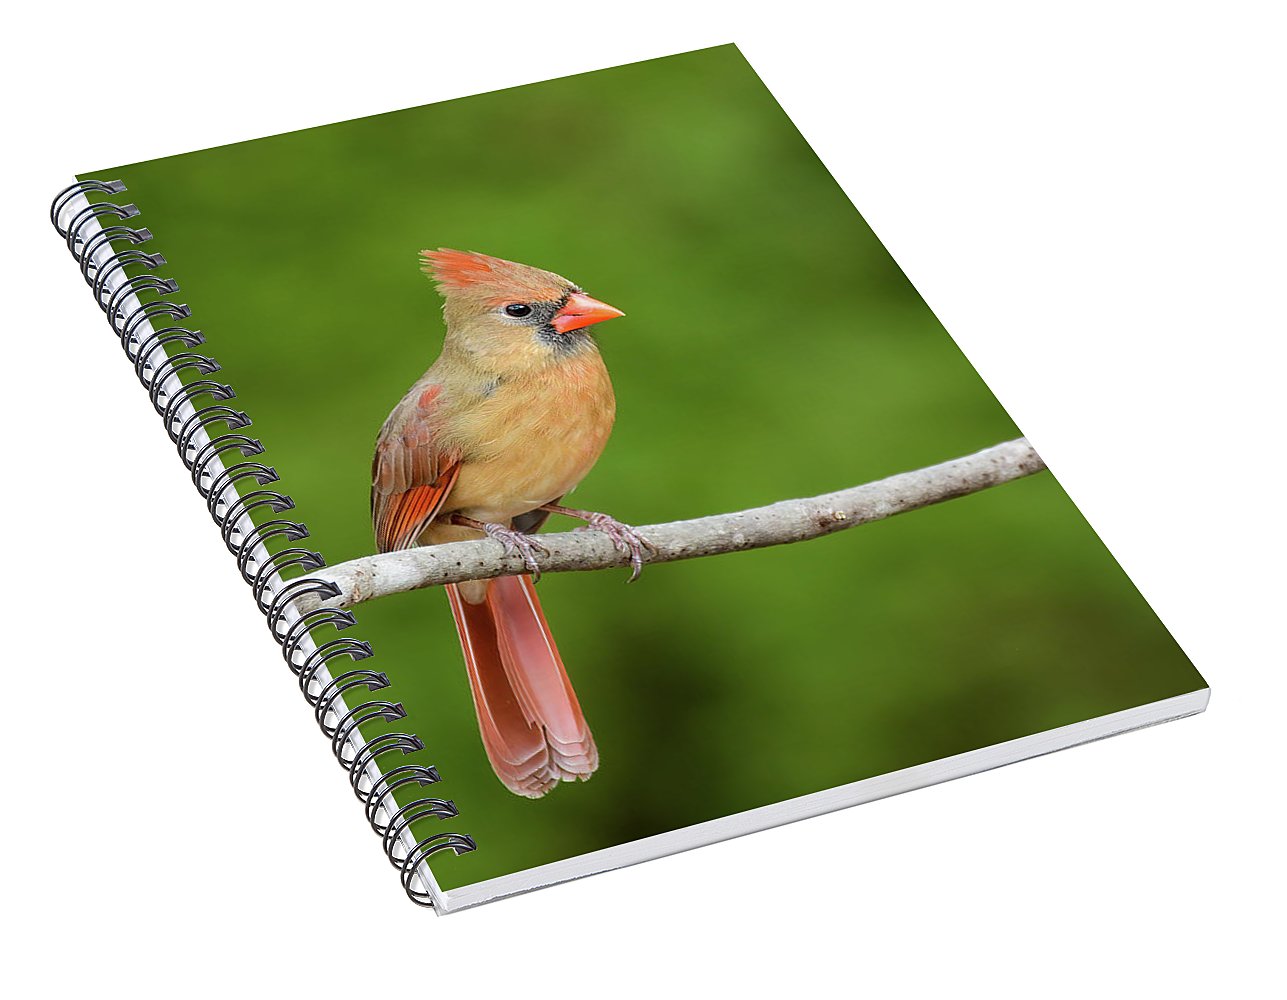 songbird, resting, red, nature, cardinal, feathers, branch, birds, birding, notebook, spiral notebook, journal, stationery, writing pad